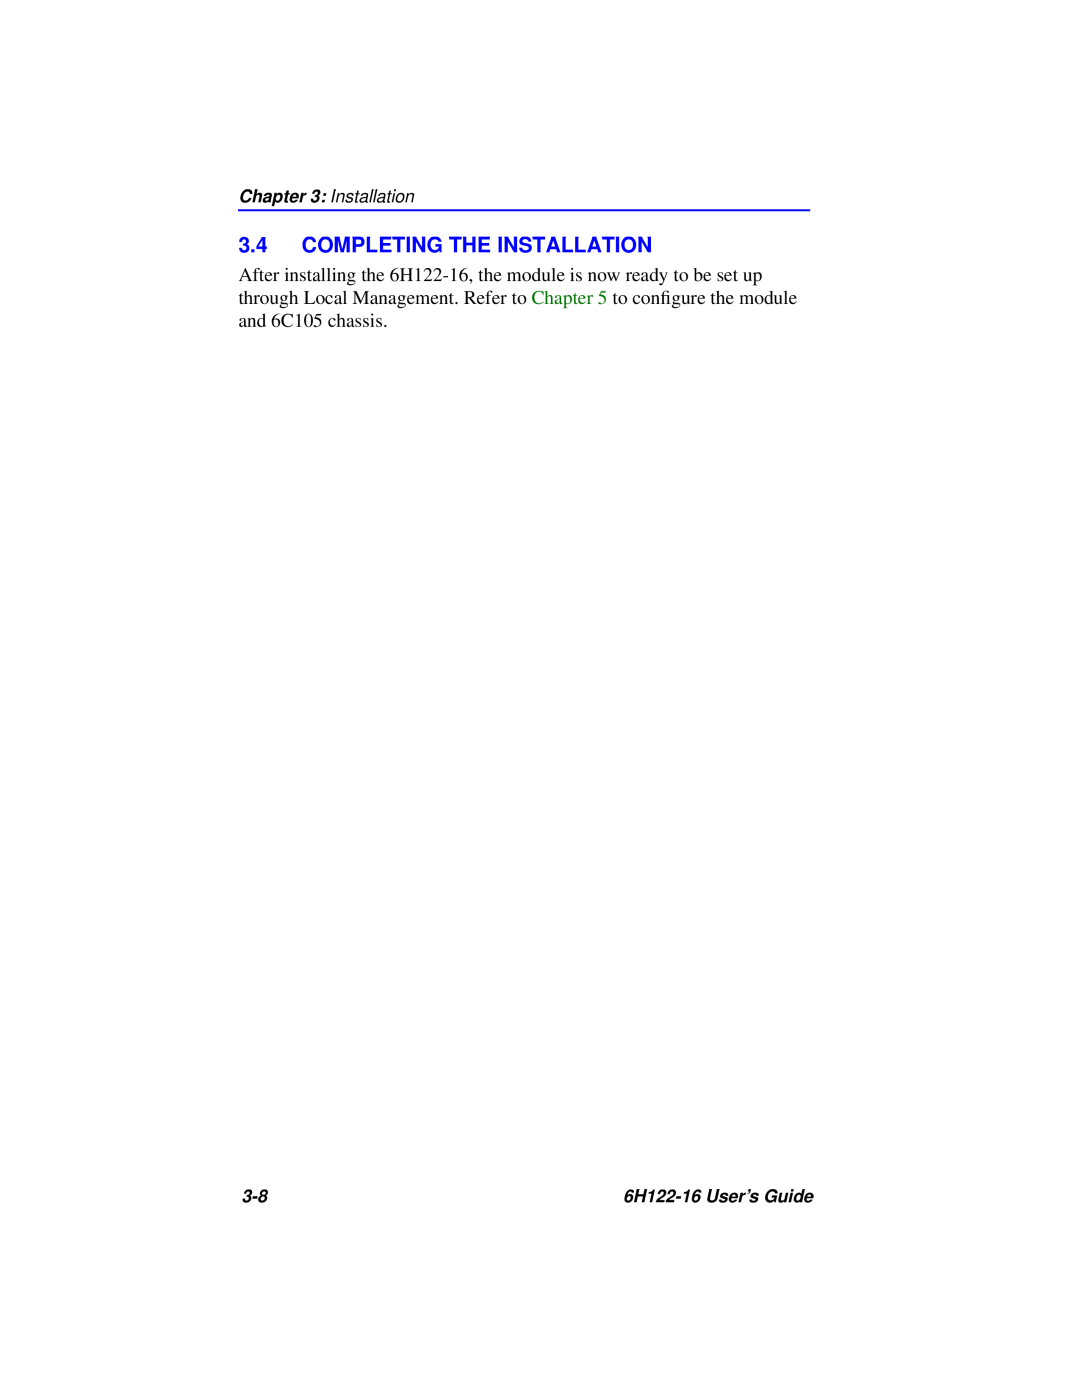 Cabletron Systems manual Completing The Installation, 6H122-16 User’s Guide 